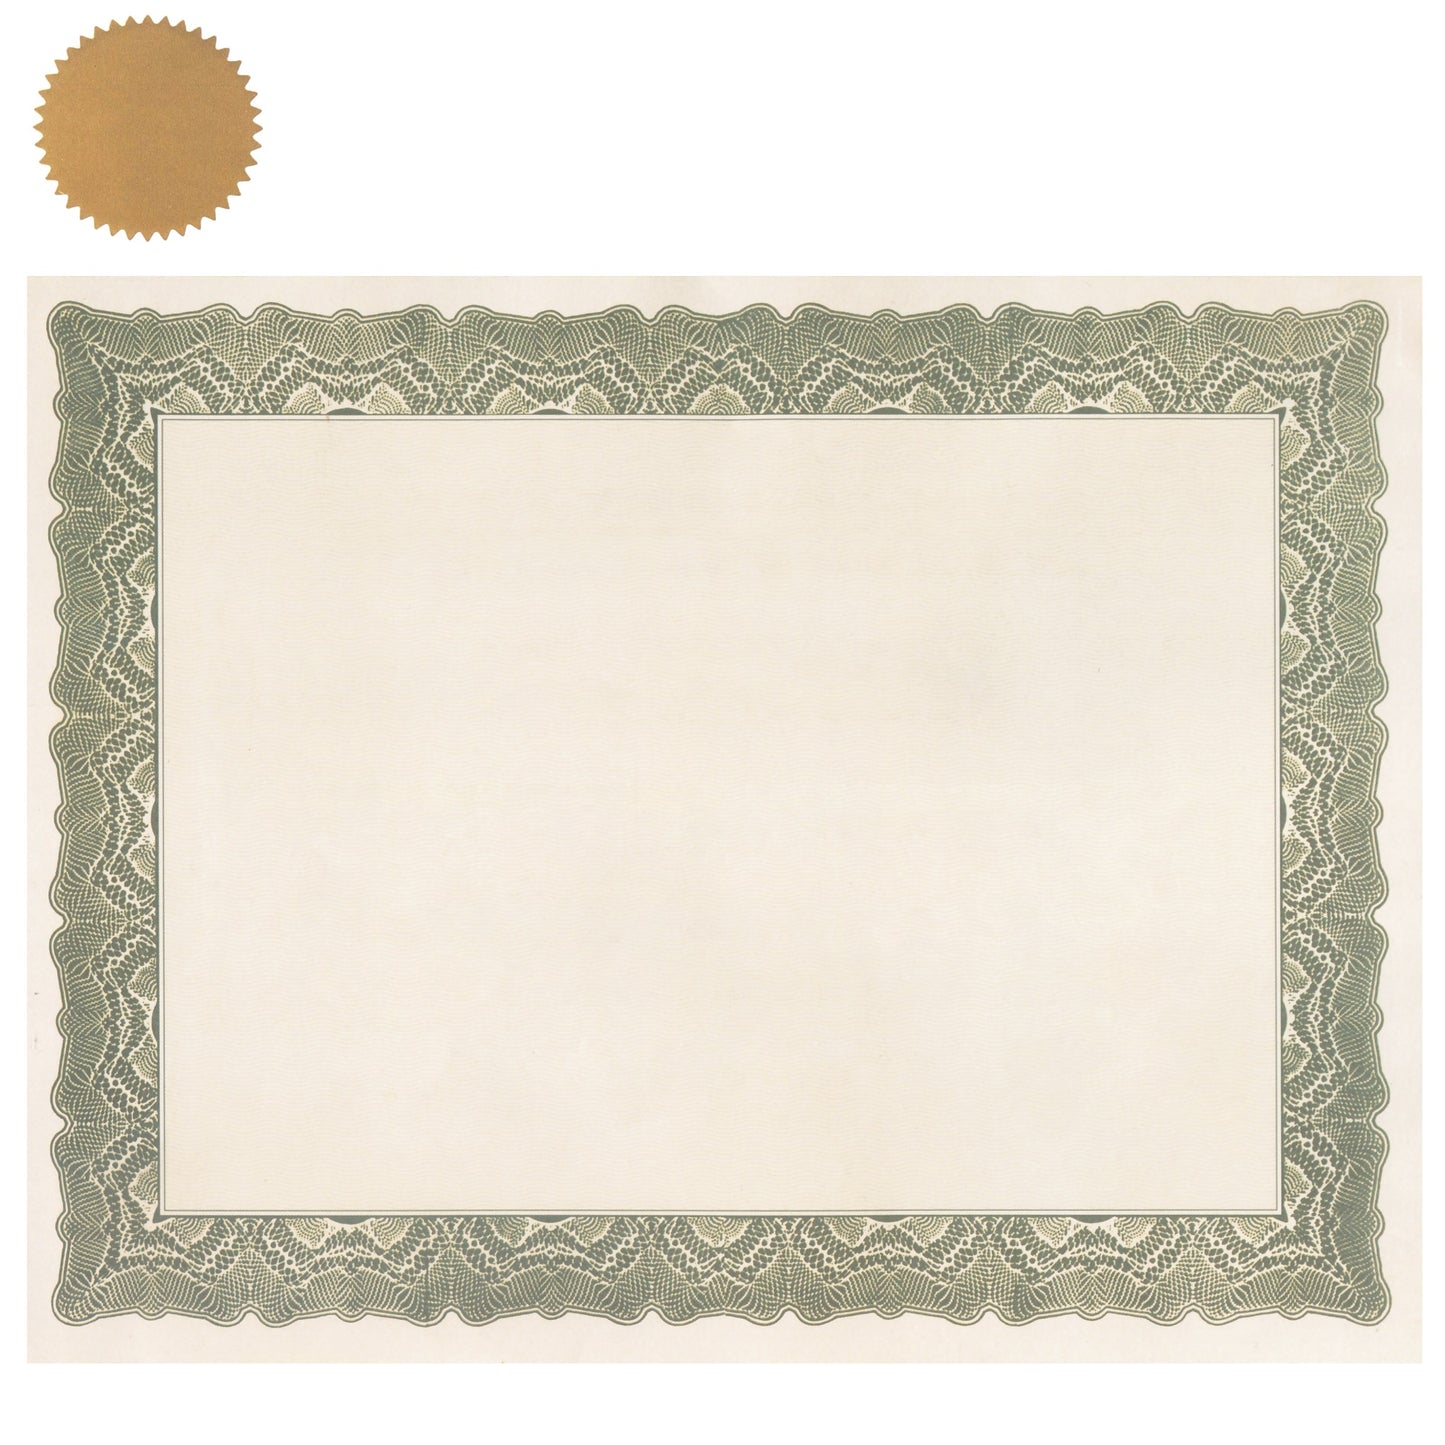 St. James® Certificates, 24 lb Paper, Gioche Green w/ Gold Seals, Pack of 25